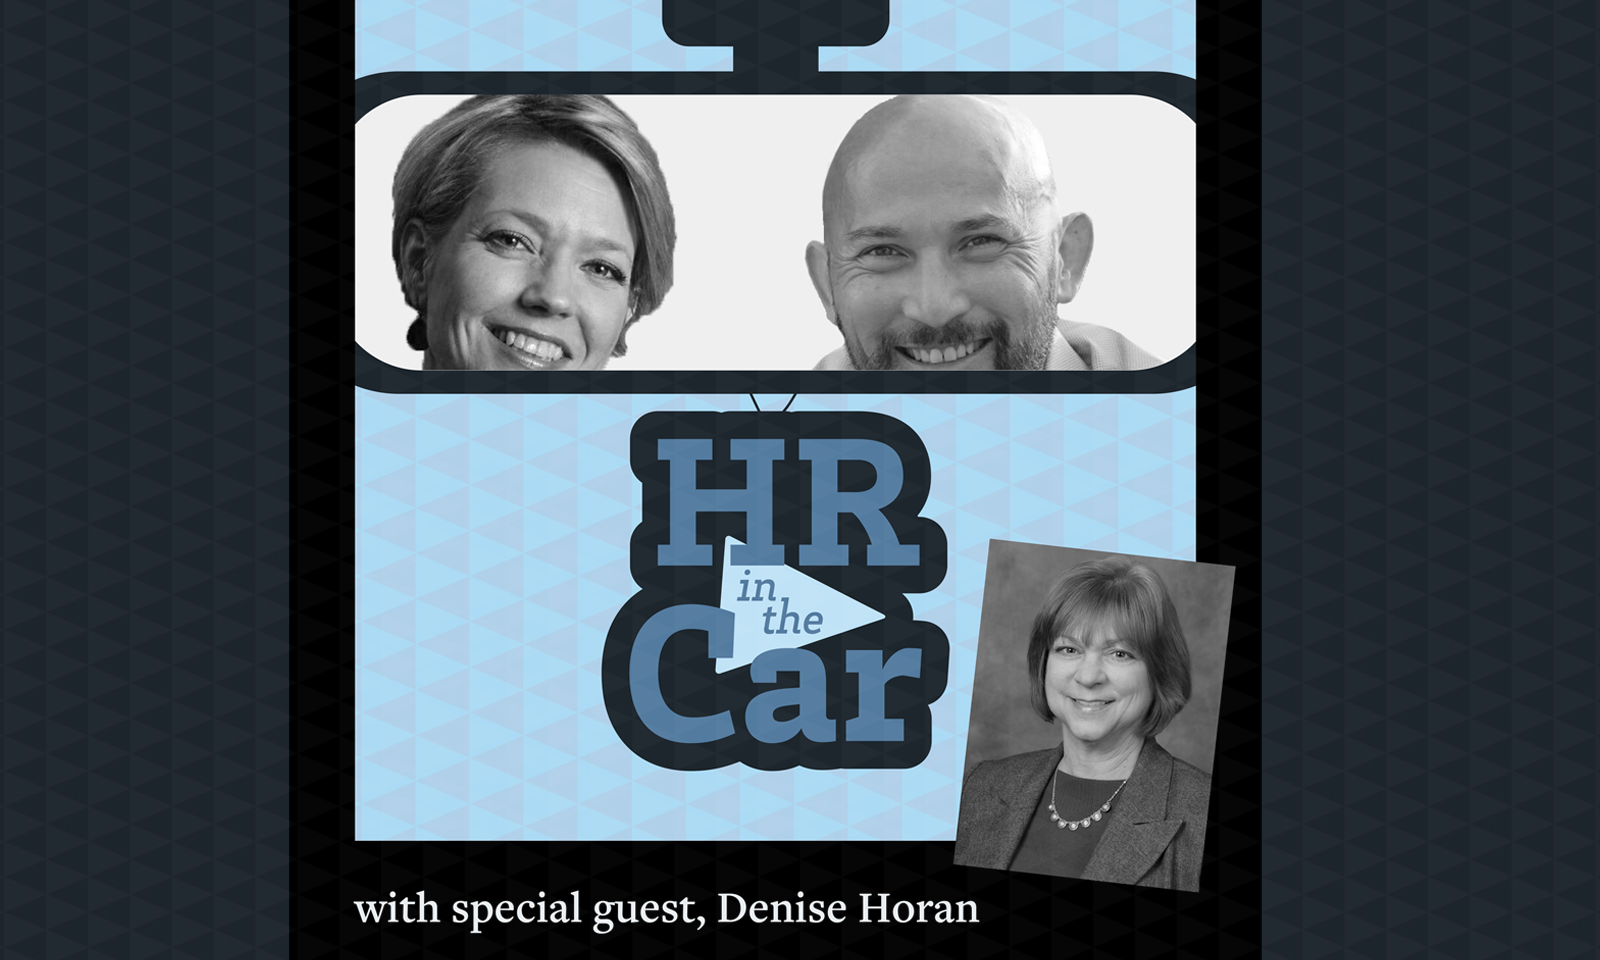 HR in the Car - Episode 9: “You Can’t Bond with a Blank Screen"